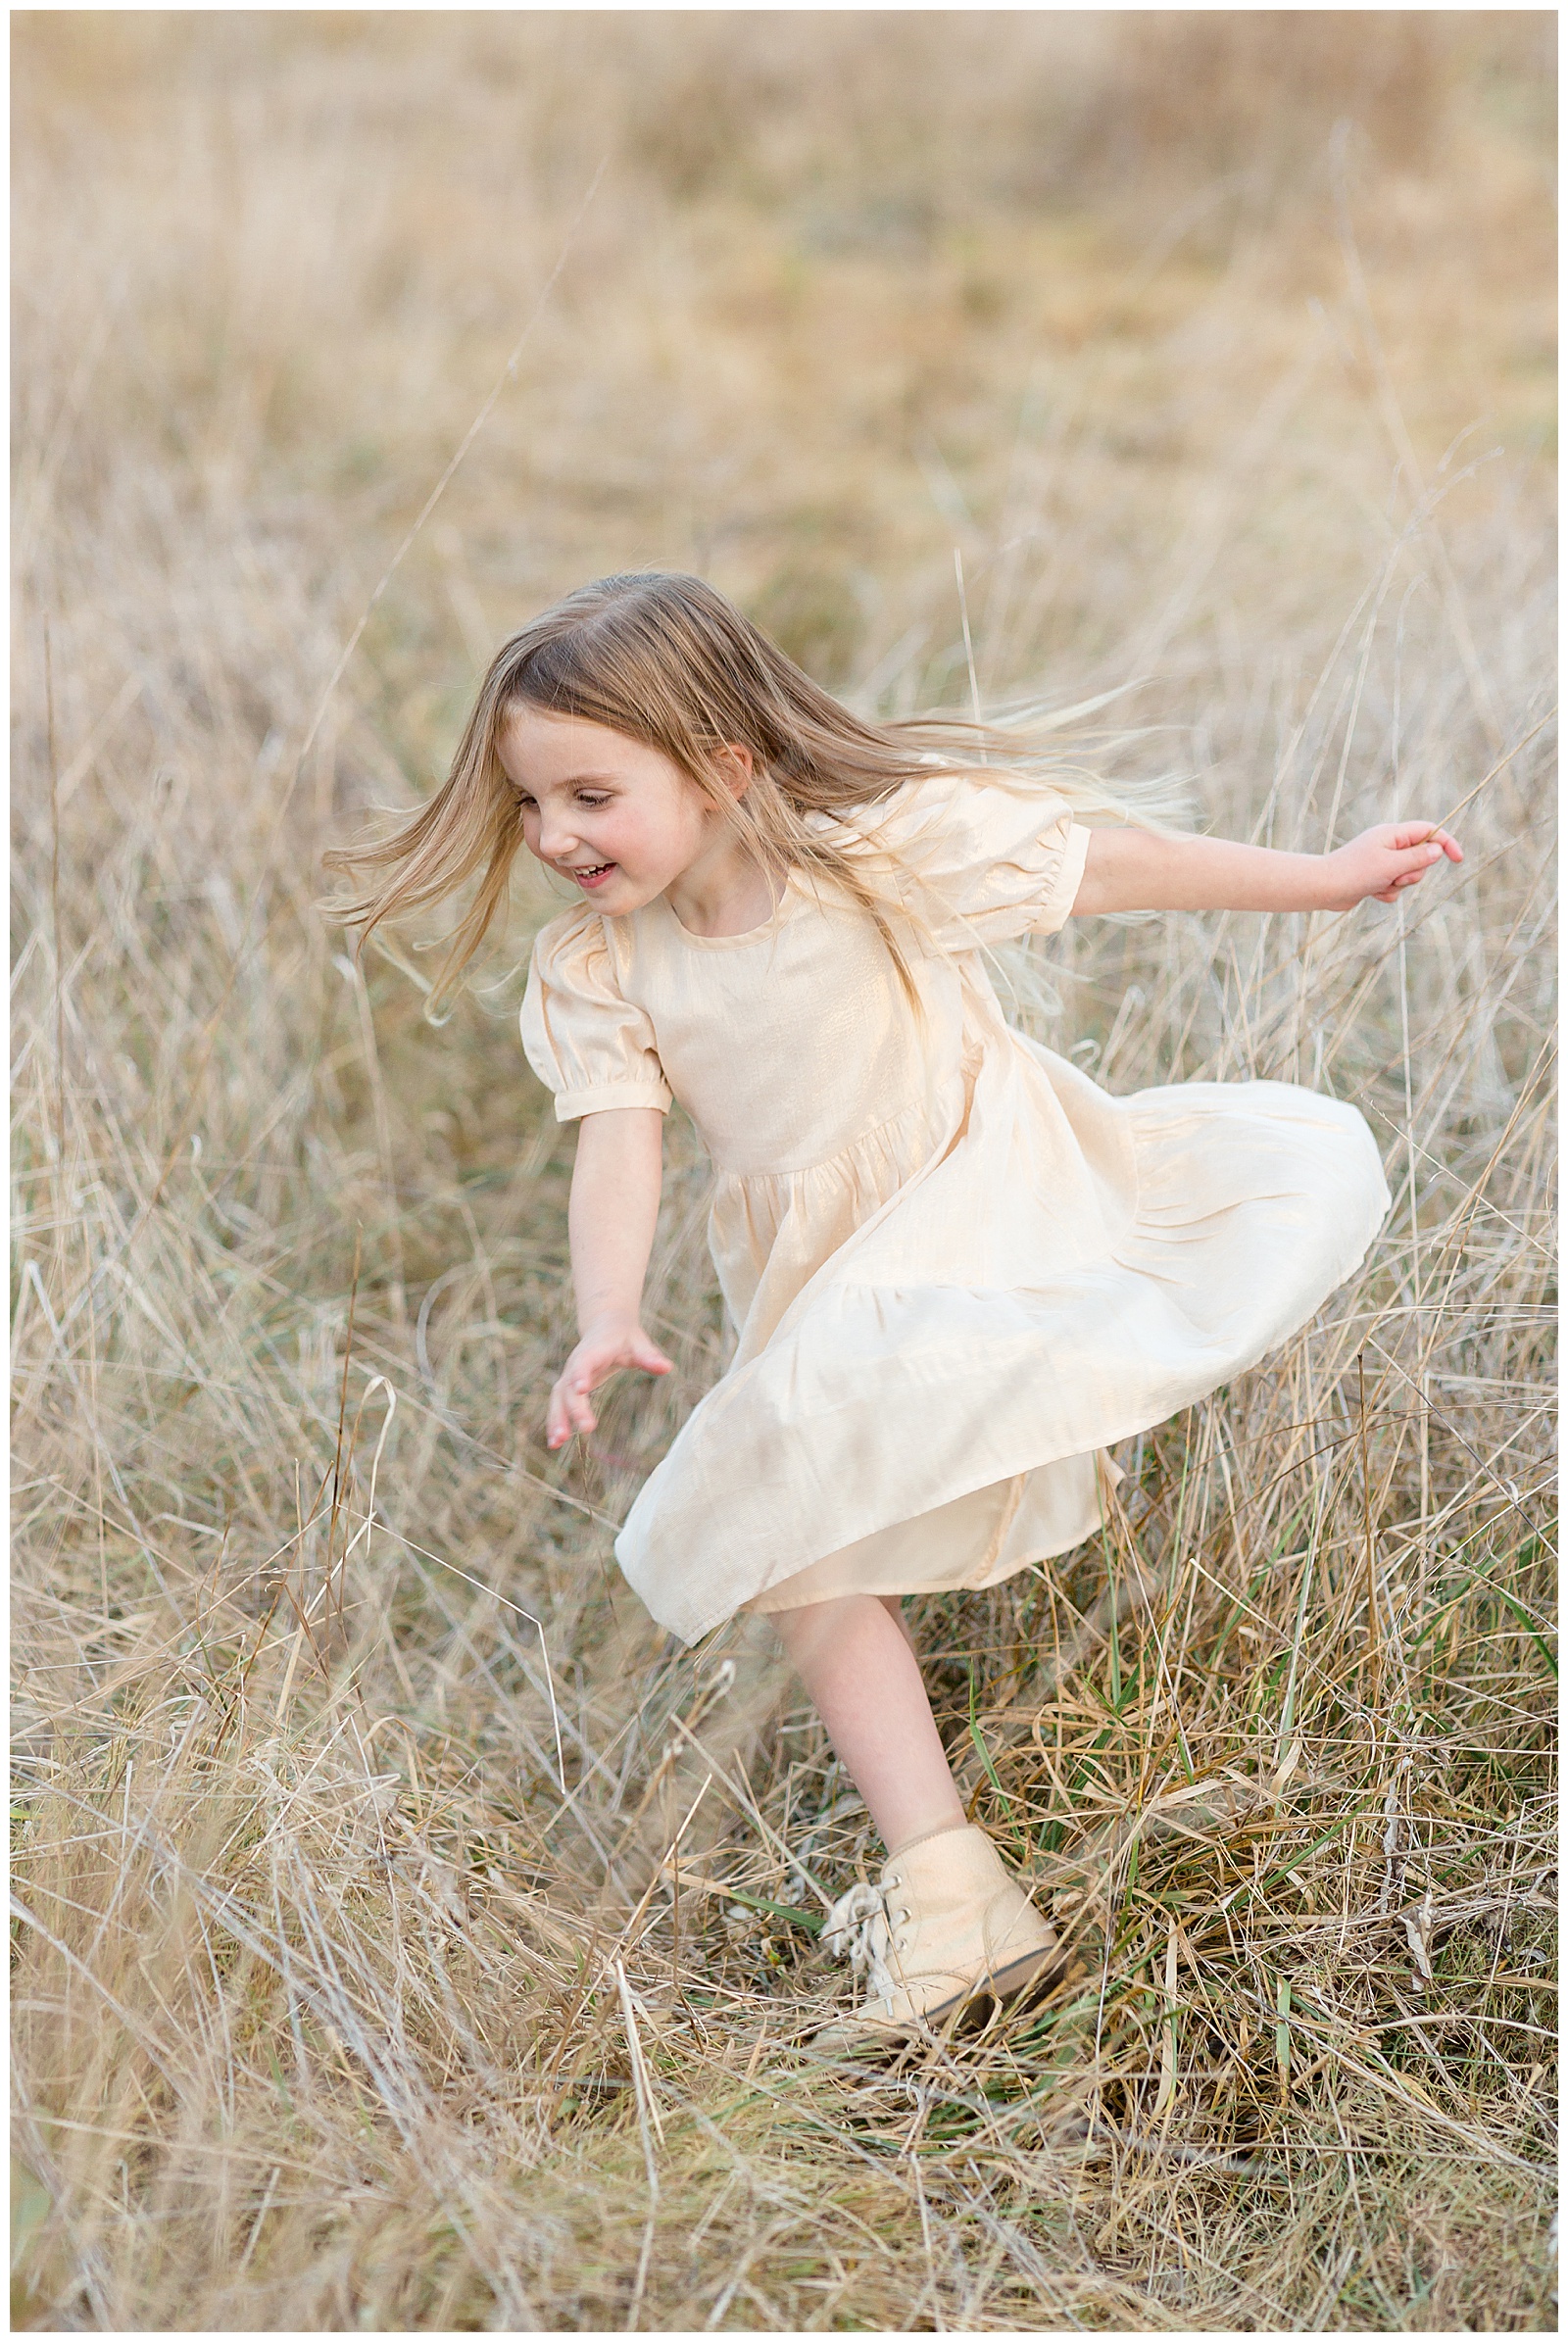 Young girl with brown hair twirls joyfully in a Nashville field with her gold/cream dress in front of Rebecca Rice's camera.  Click now to see more on the blog!